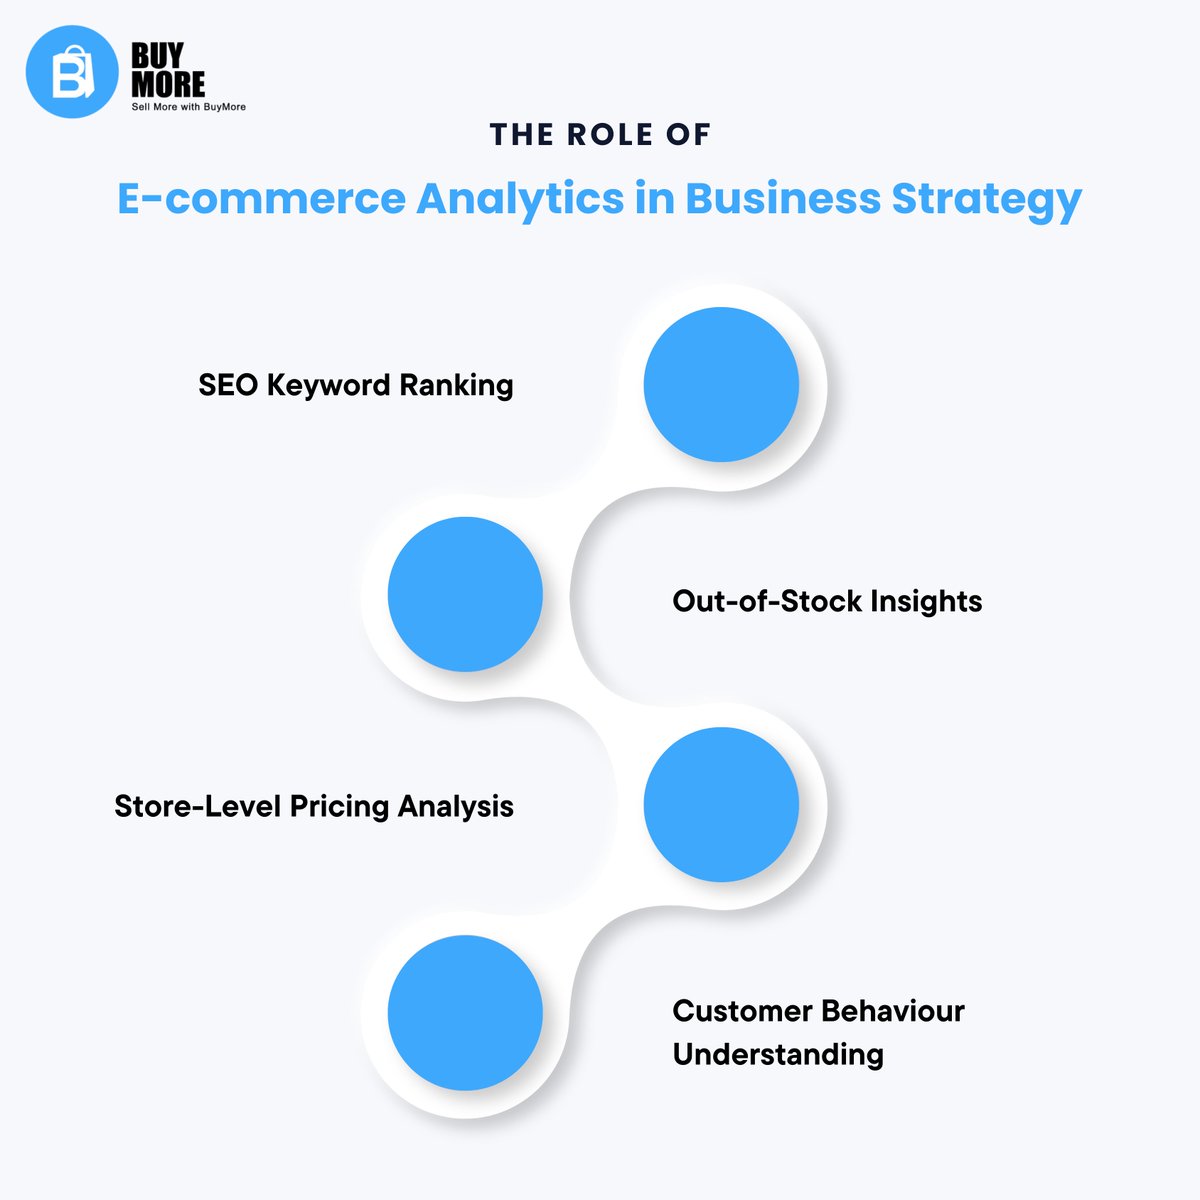 The Role of E-commerce Analytics in Business Strategy! 📈

#EcommerceStrategy #Analytics #OnlineRetail #SEOStrategy #InventoryManagement #RetailAnalytics #CustomerBehaviour #RetailTech #DataDriven #EcommerceSuccess #RetailTrends #OnlineShopping #EcommerceAnalytics #BuyMore